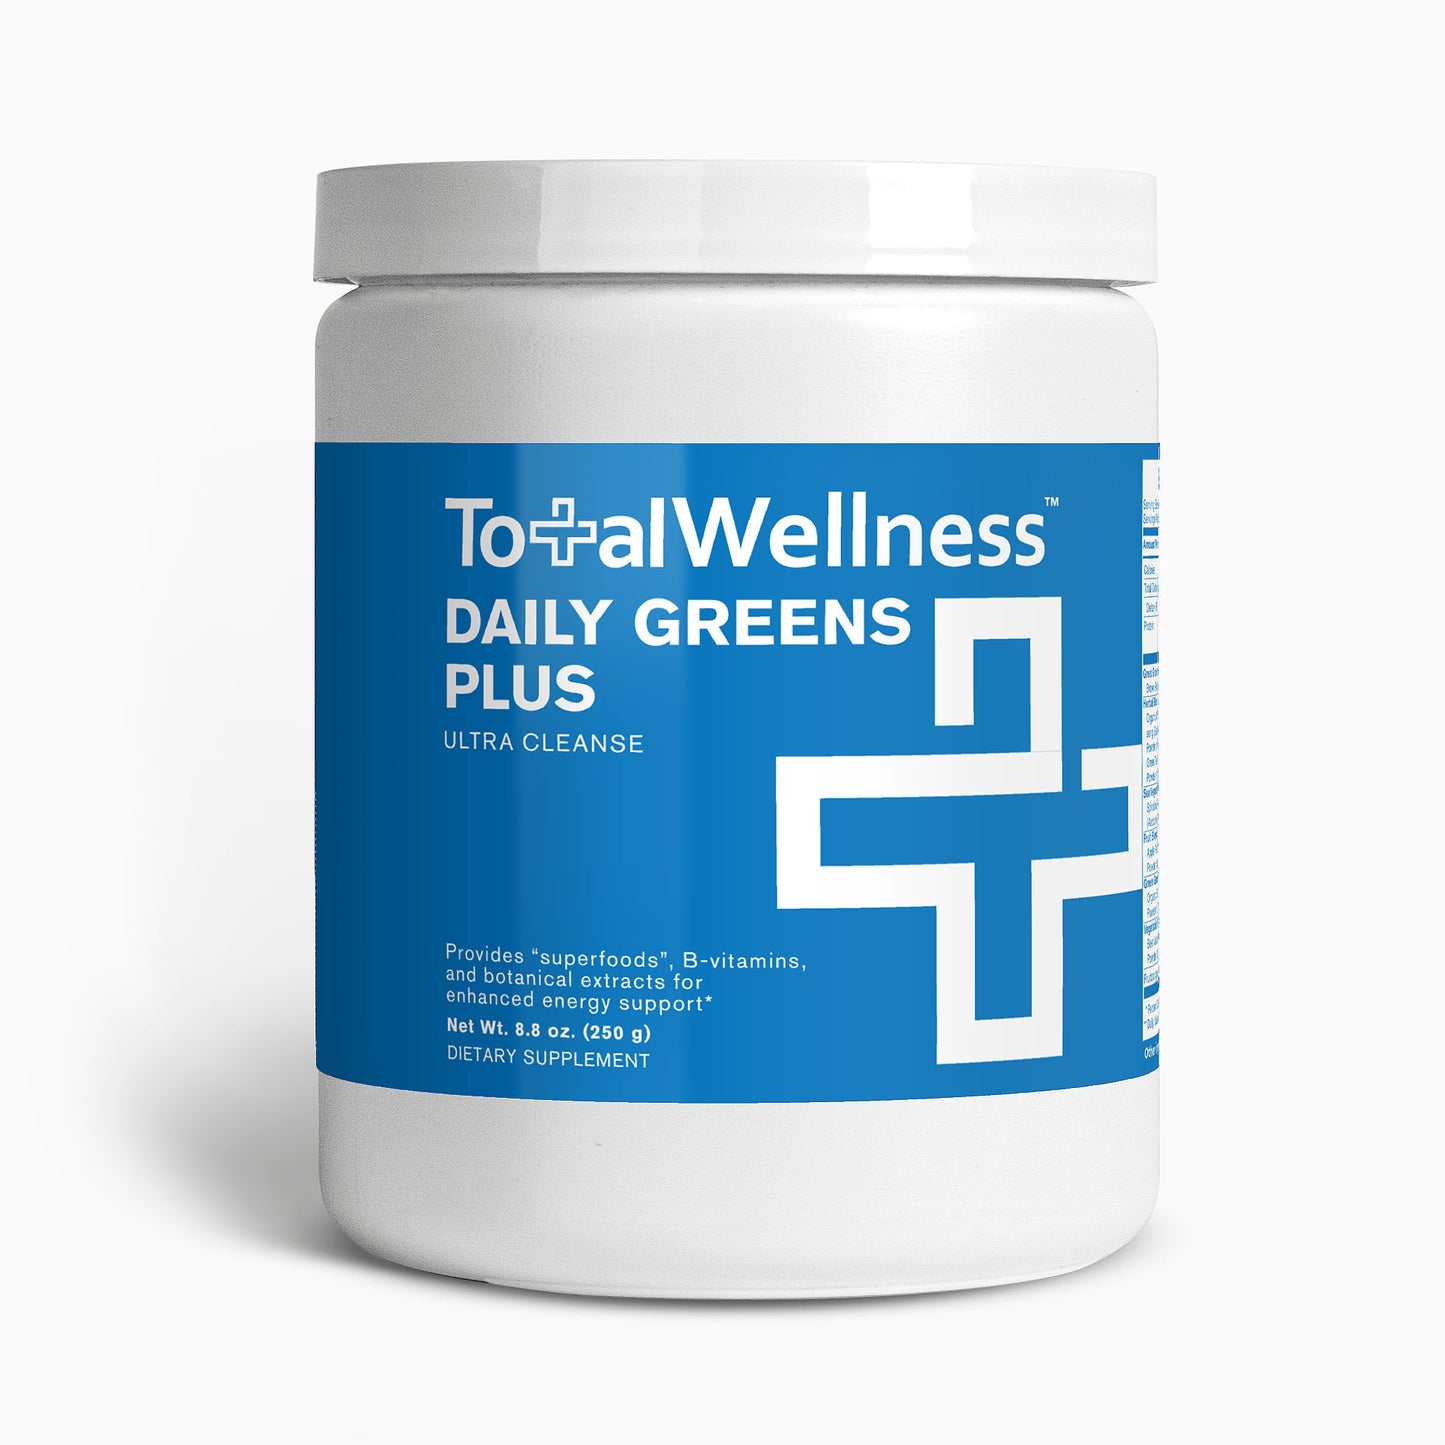 Pure Daily Greens